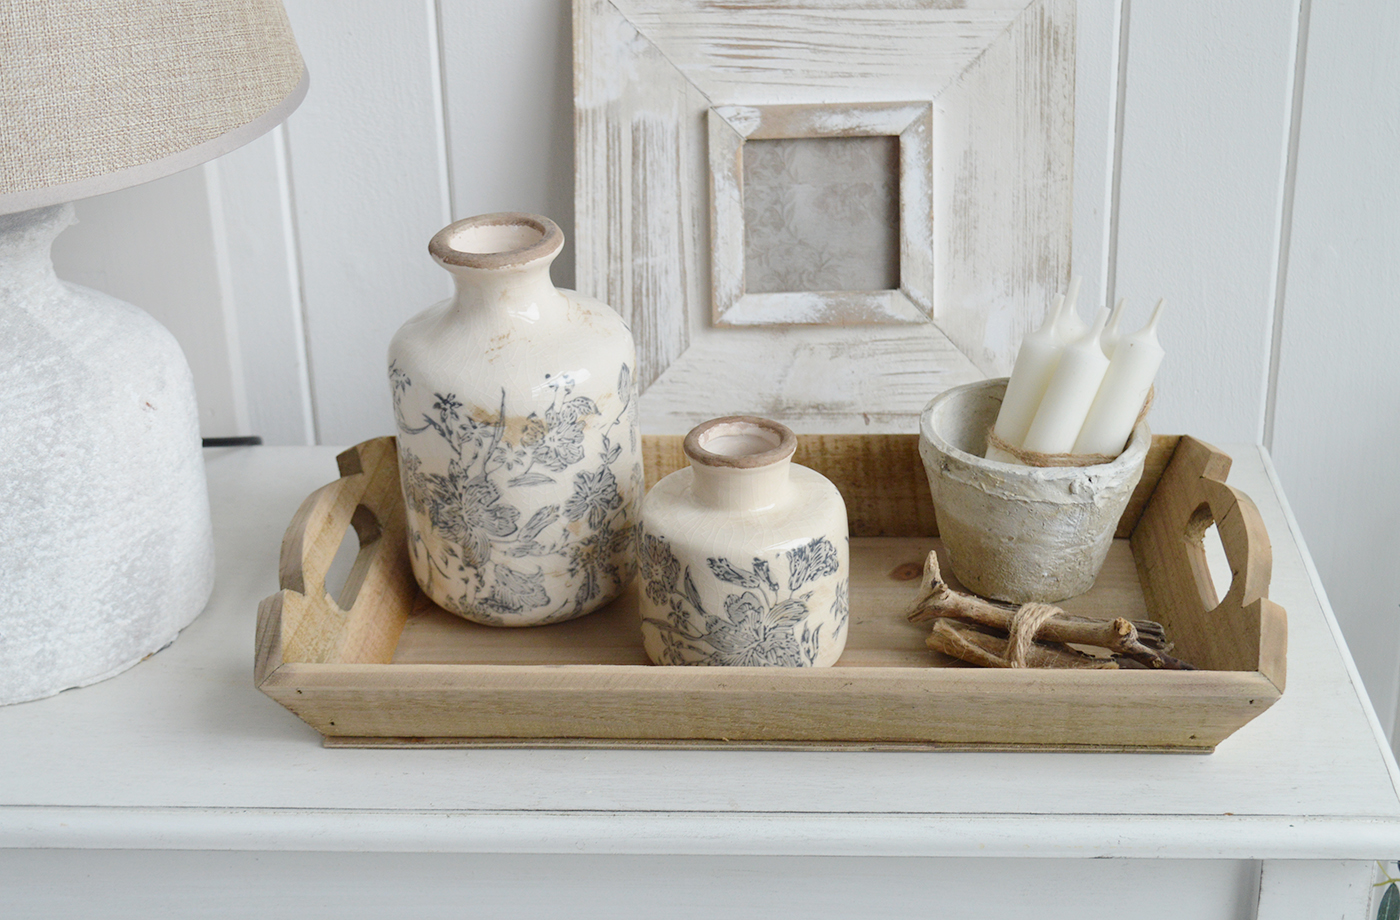 Wooden Pawtucket Display Tray - New England Coastal and Country Home Interiors